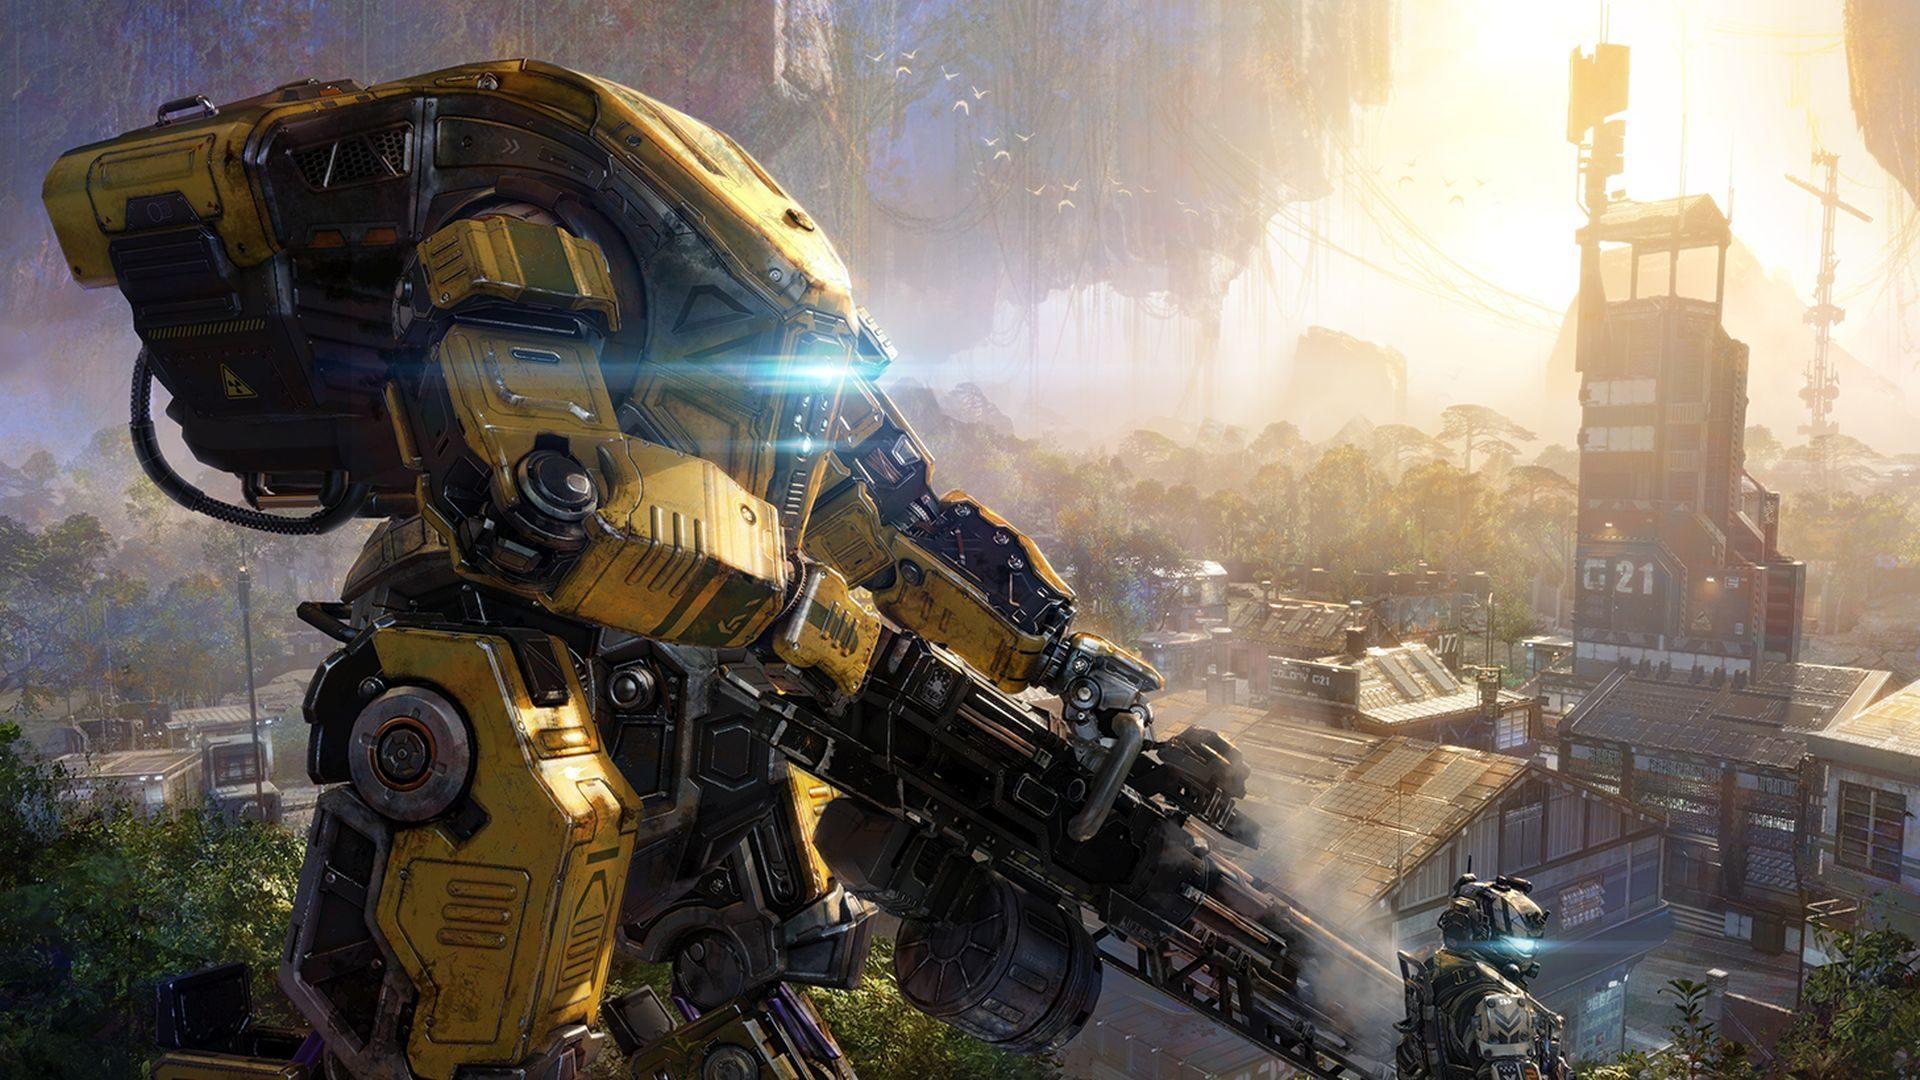 Titanfall 3 could well be on the menu as early as 2022, if EA's new tease is to be believed.